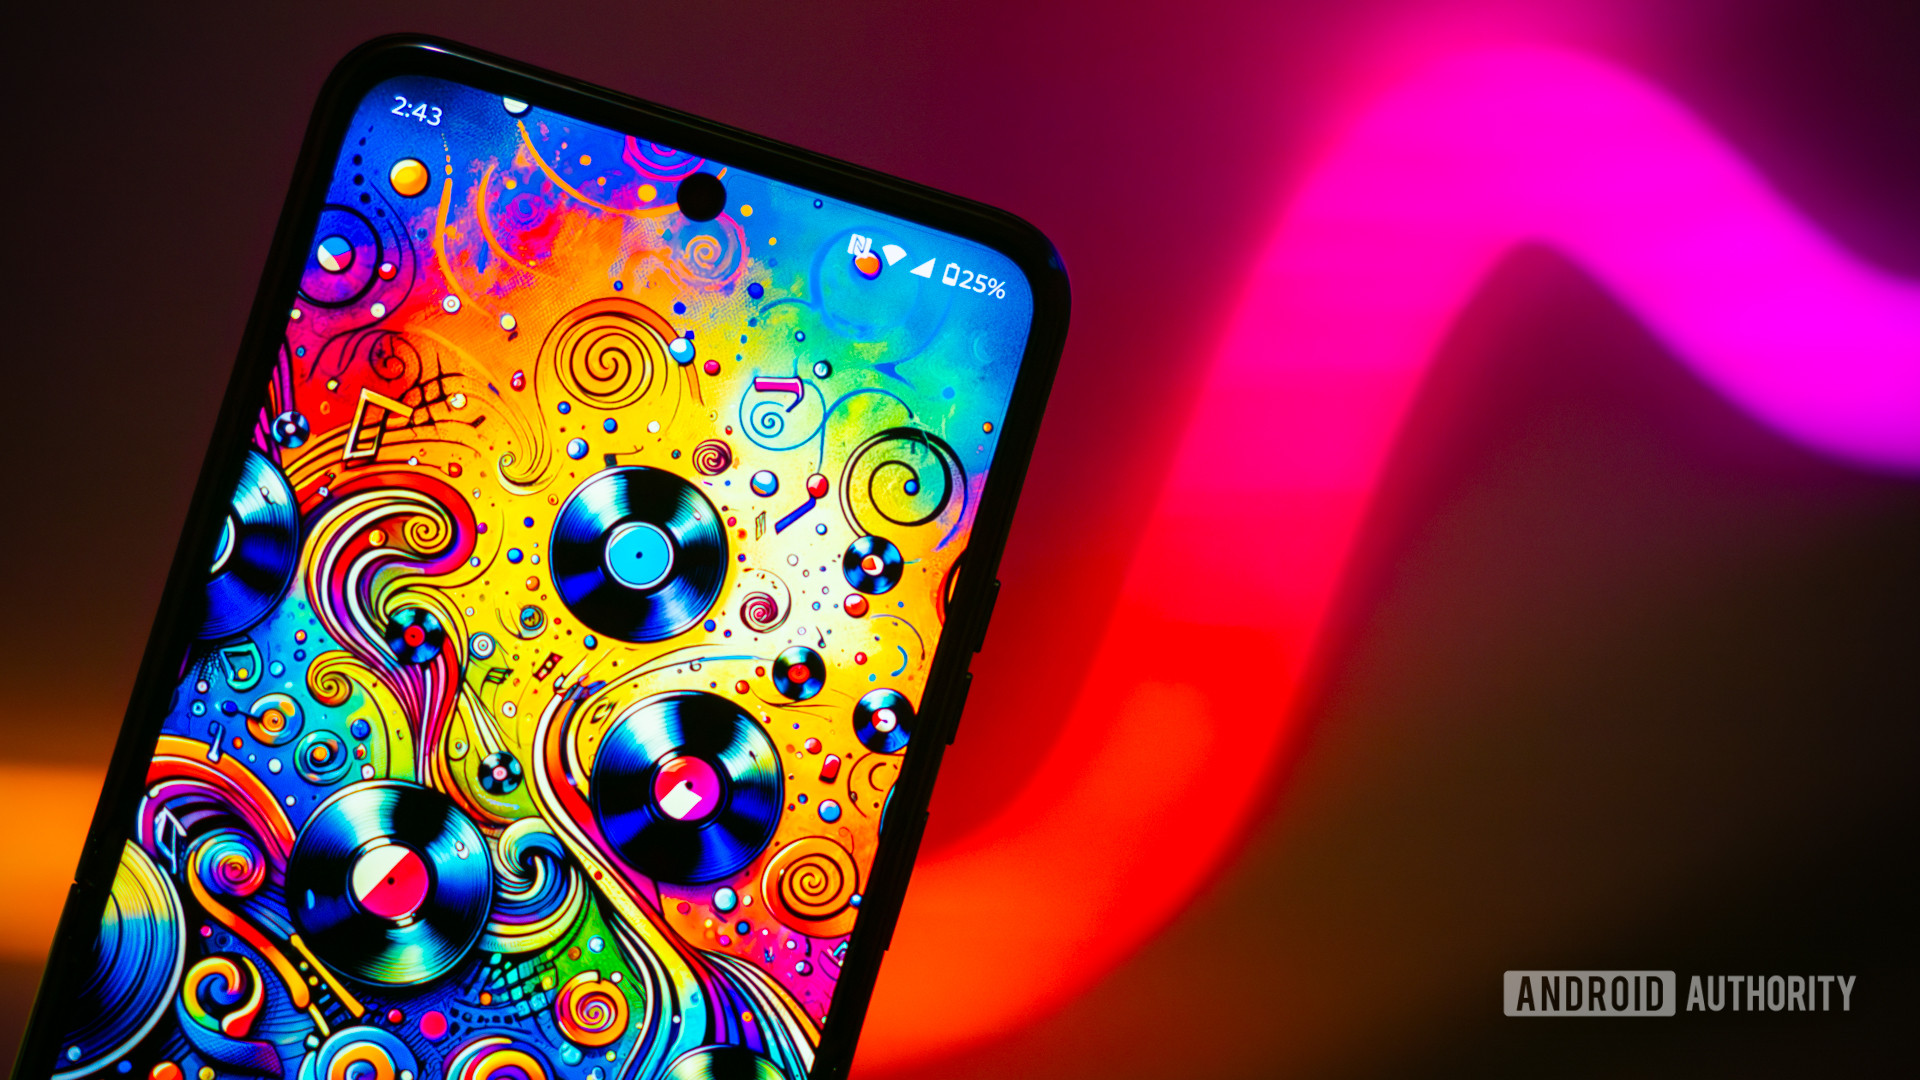 Funky wallpaper on a smartphone